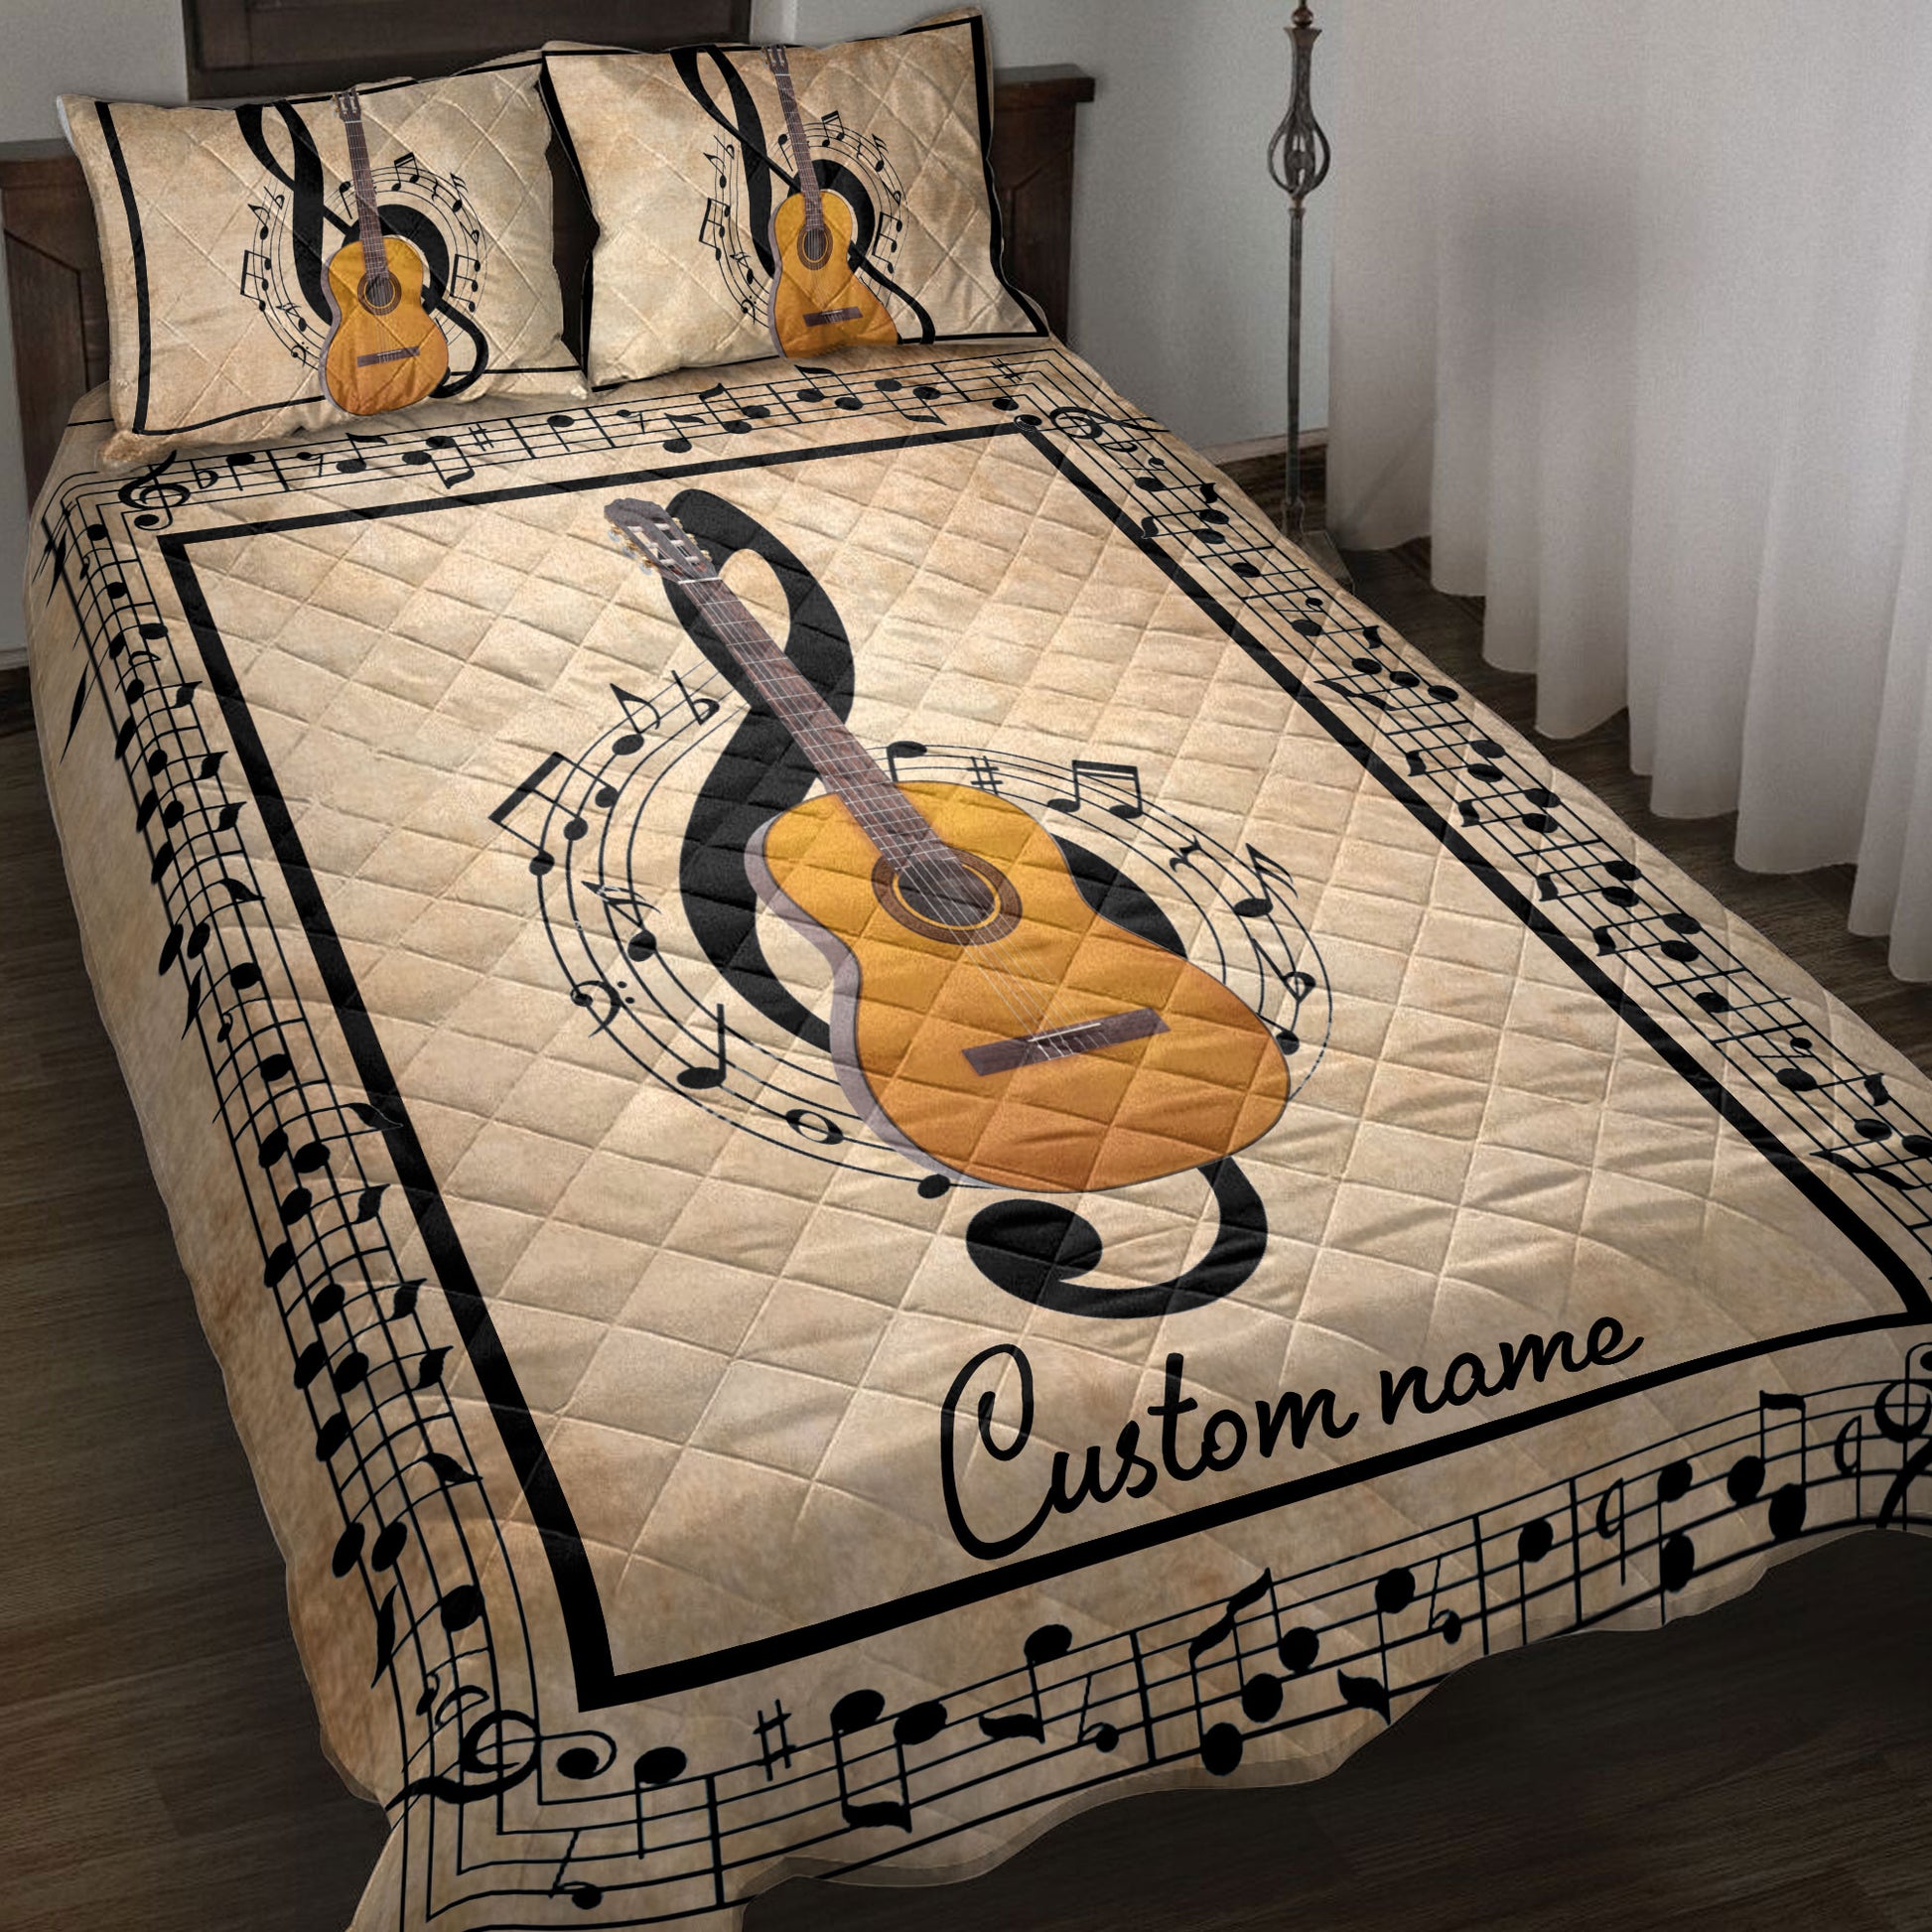 Ohaprints-Quilt-Bed-Set-Pillowcase-Acoustic-Guitar-Guitaris-Music-Treble-Clef-Custom-Personalized-Name-Blanket-Bedspread-Bedding-3879-Throw (55'' x 60'')